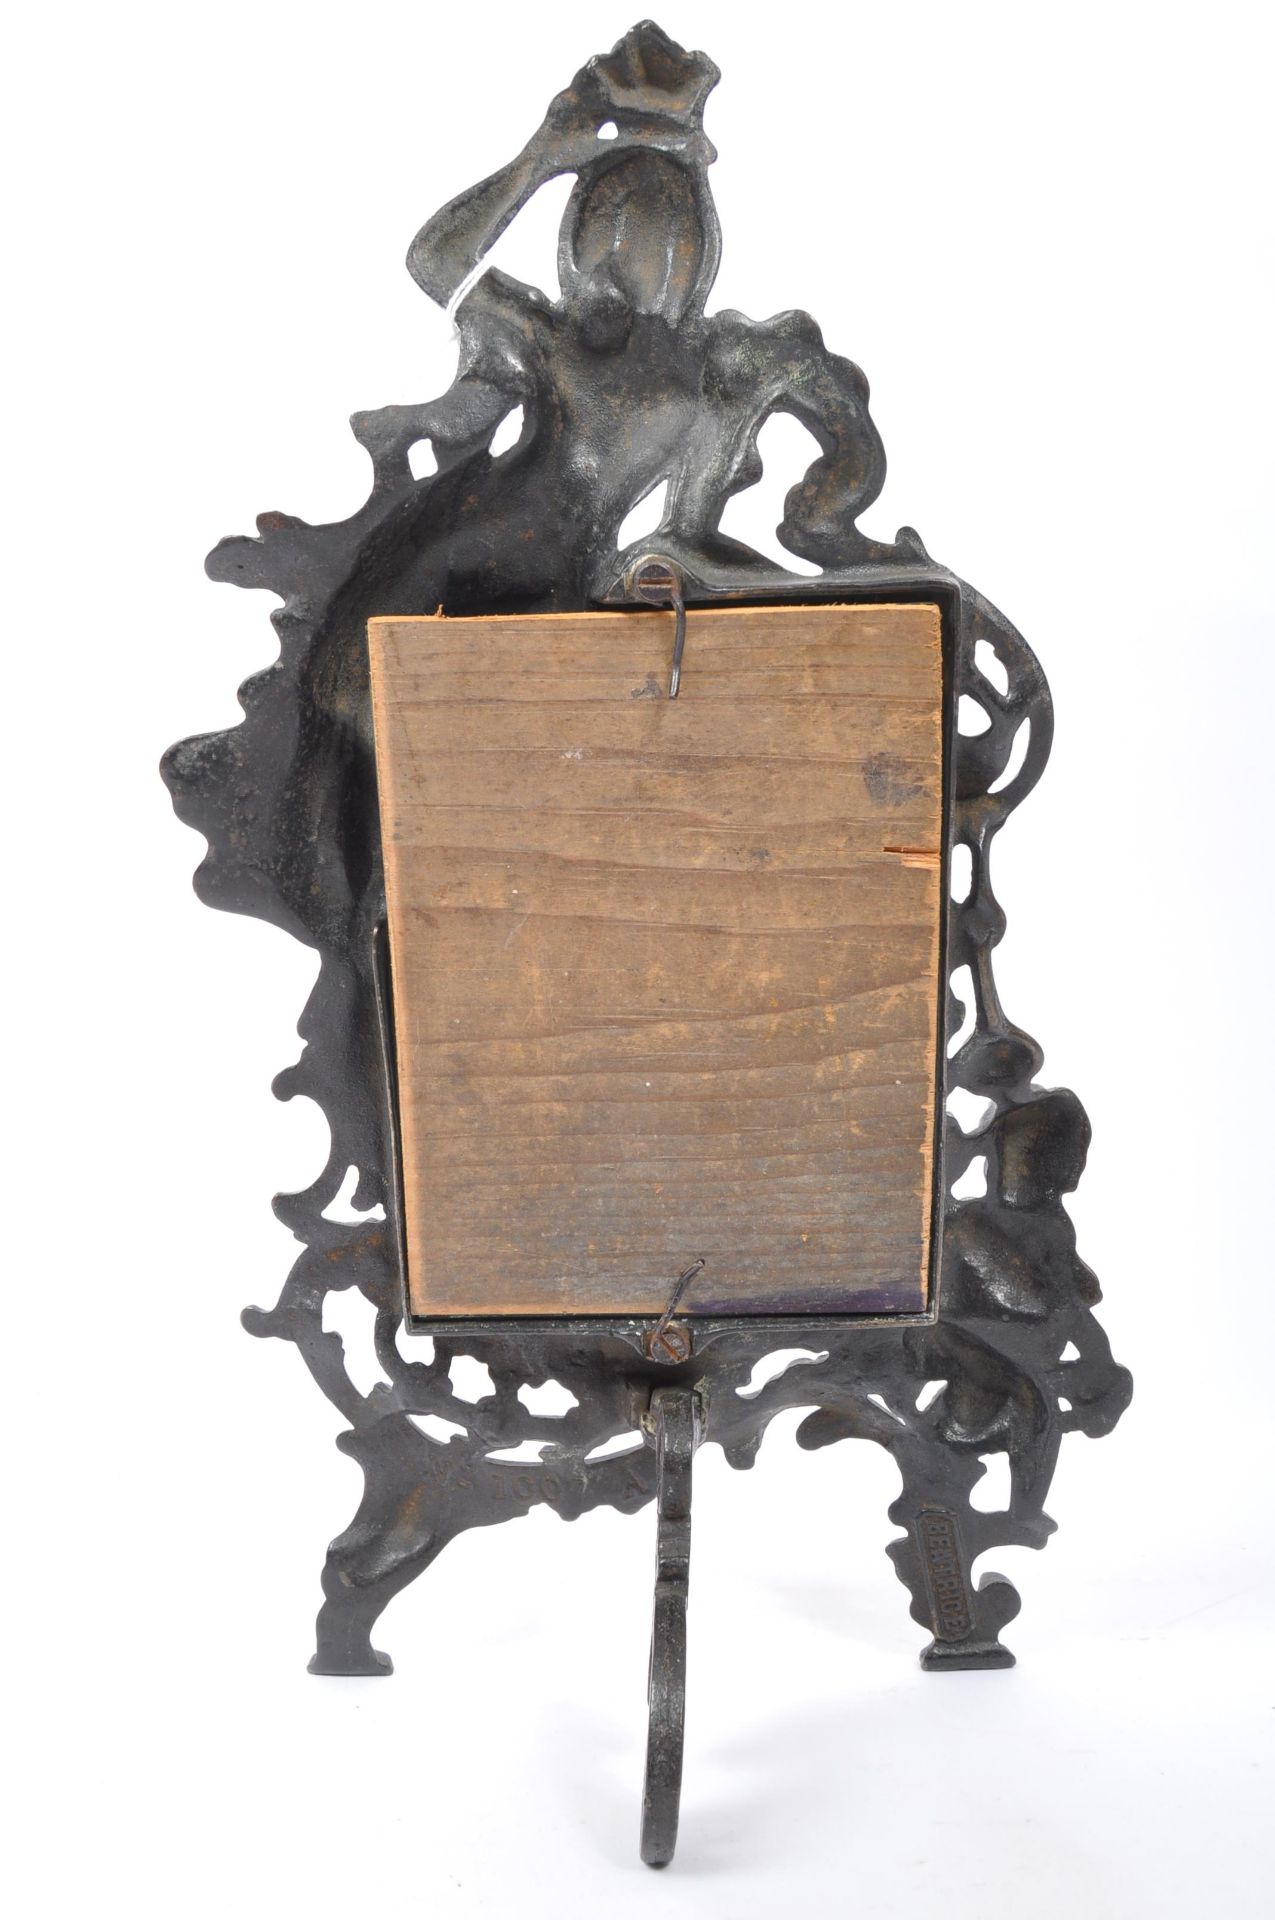 VICTORIAN FRENCH ART NOUVEAU PHOTO FRAME - Image 5 of 5